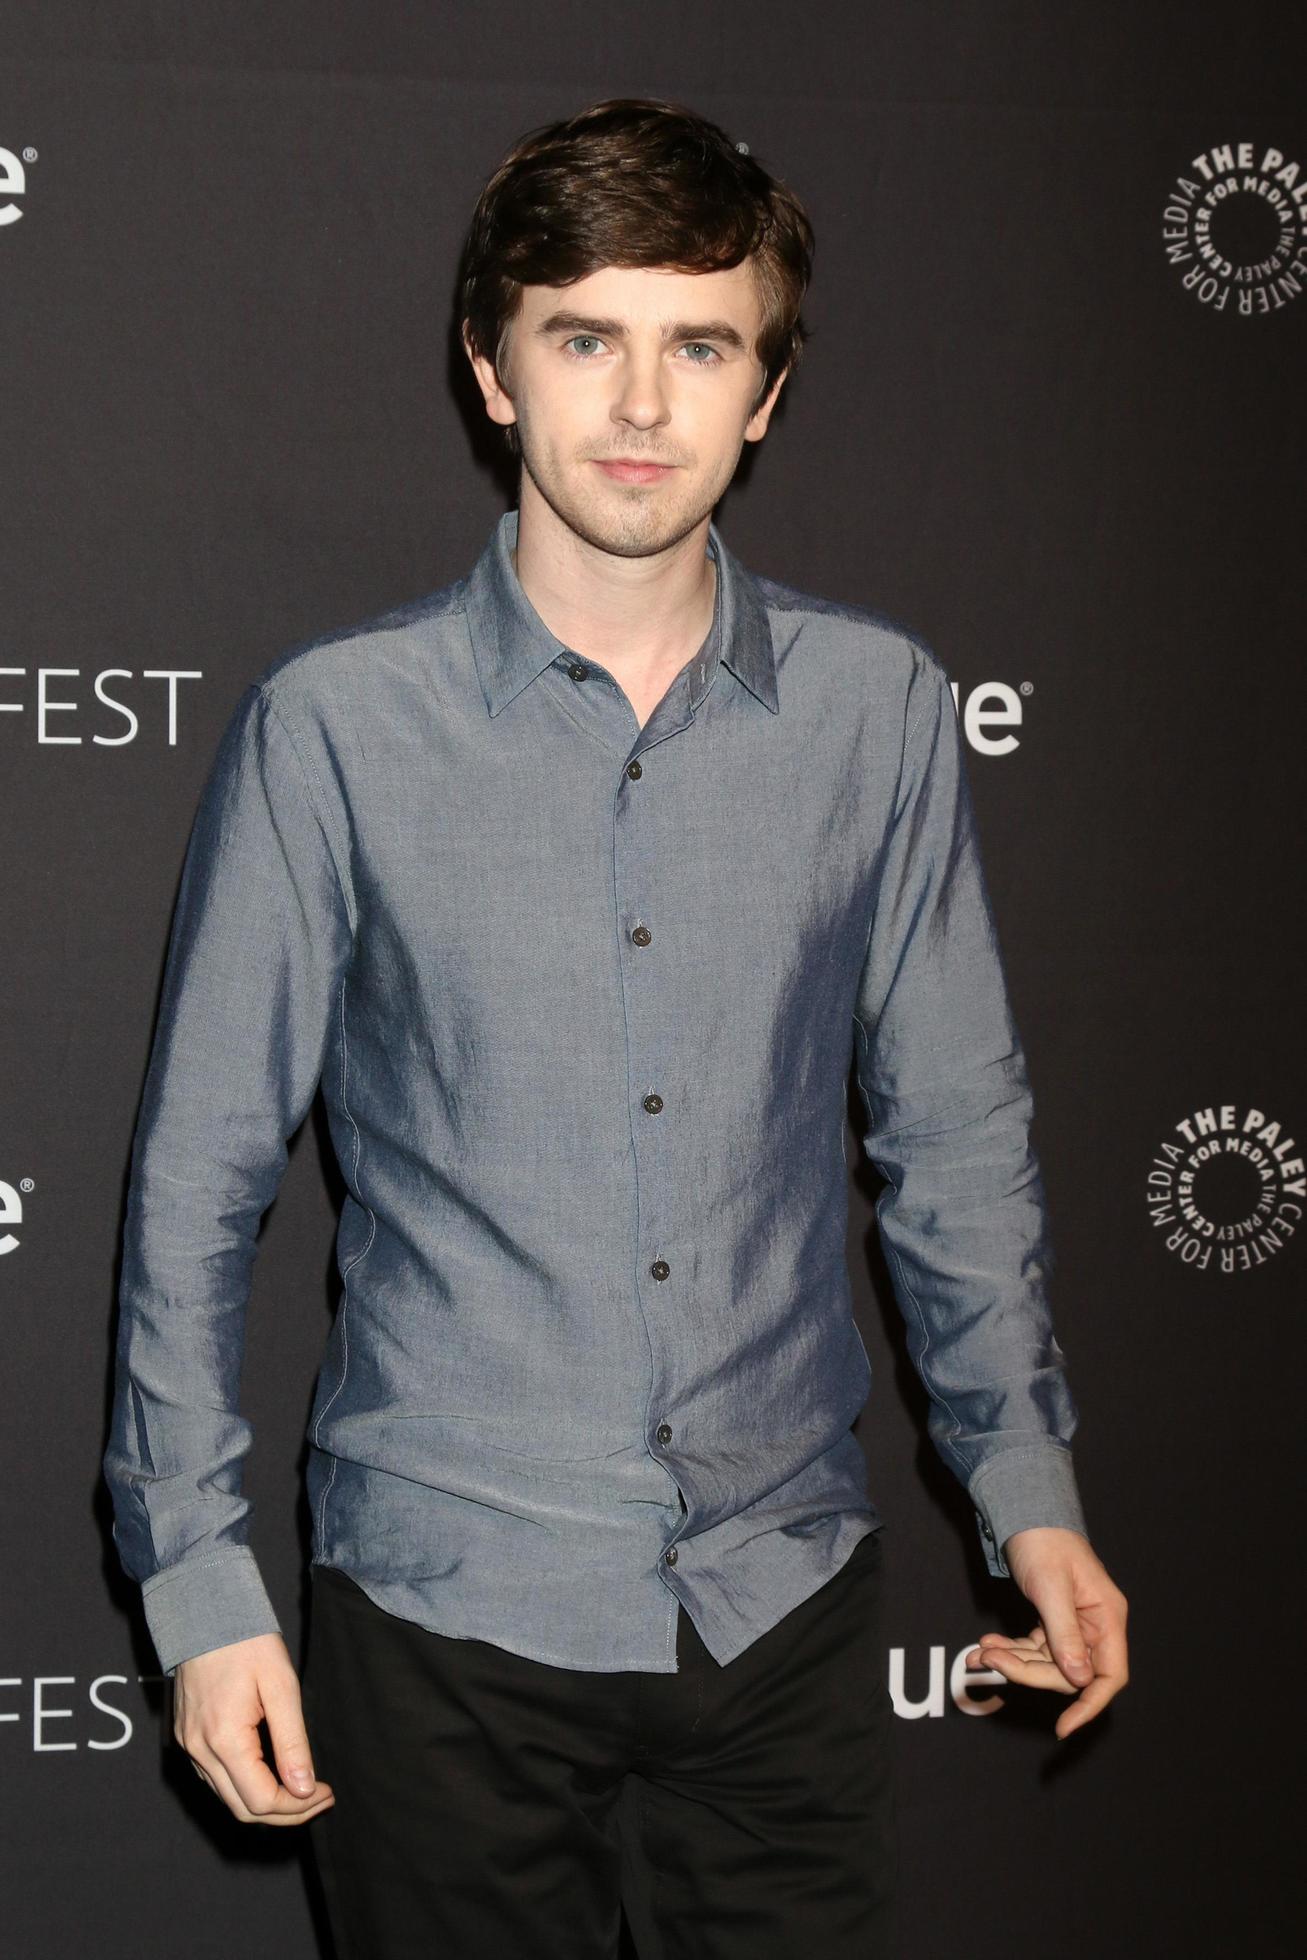 Los Angeles Mar 22 Freddie Highmore At The 2018 Paleyfest Los Angeles The Good Doctor At